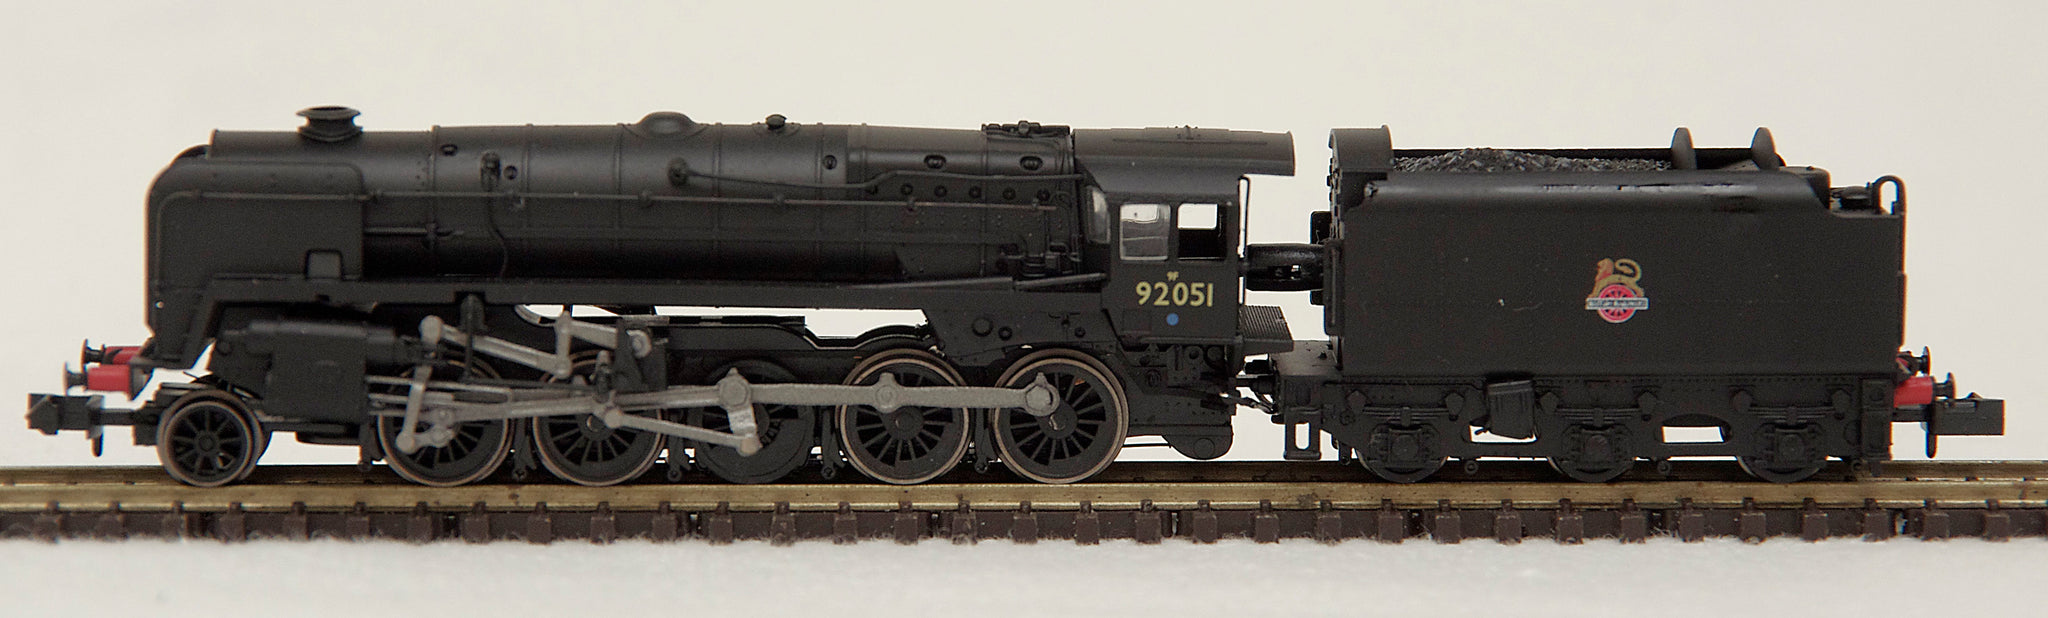 Dapol 2S-013-007 9F 92051 BR Unlined Black Early Crest N Gauge